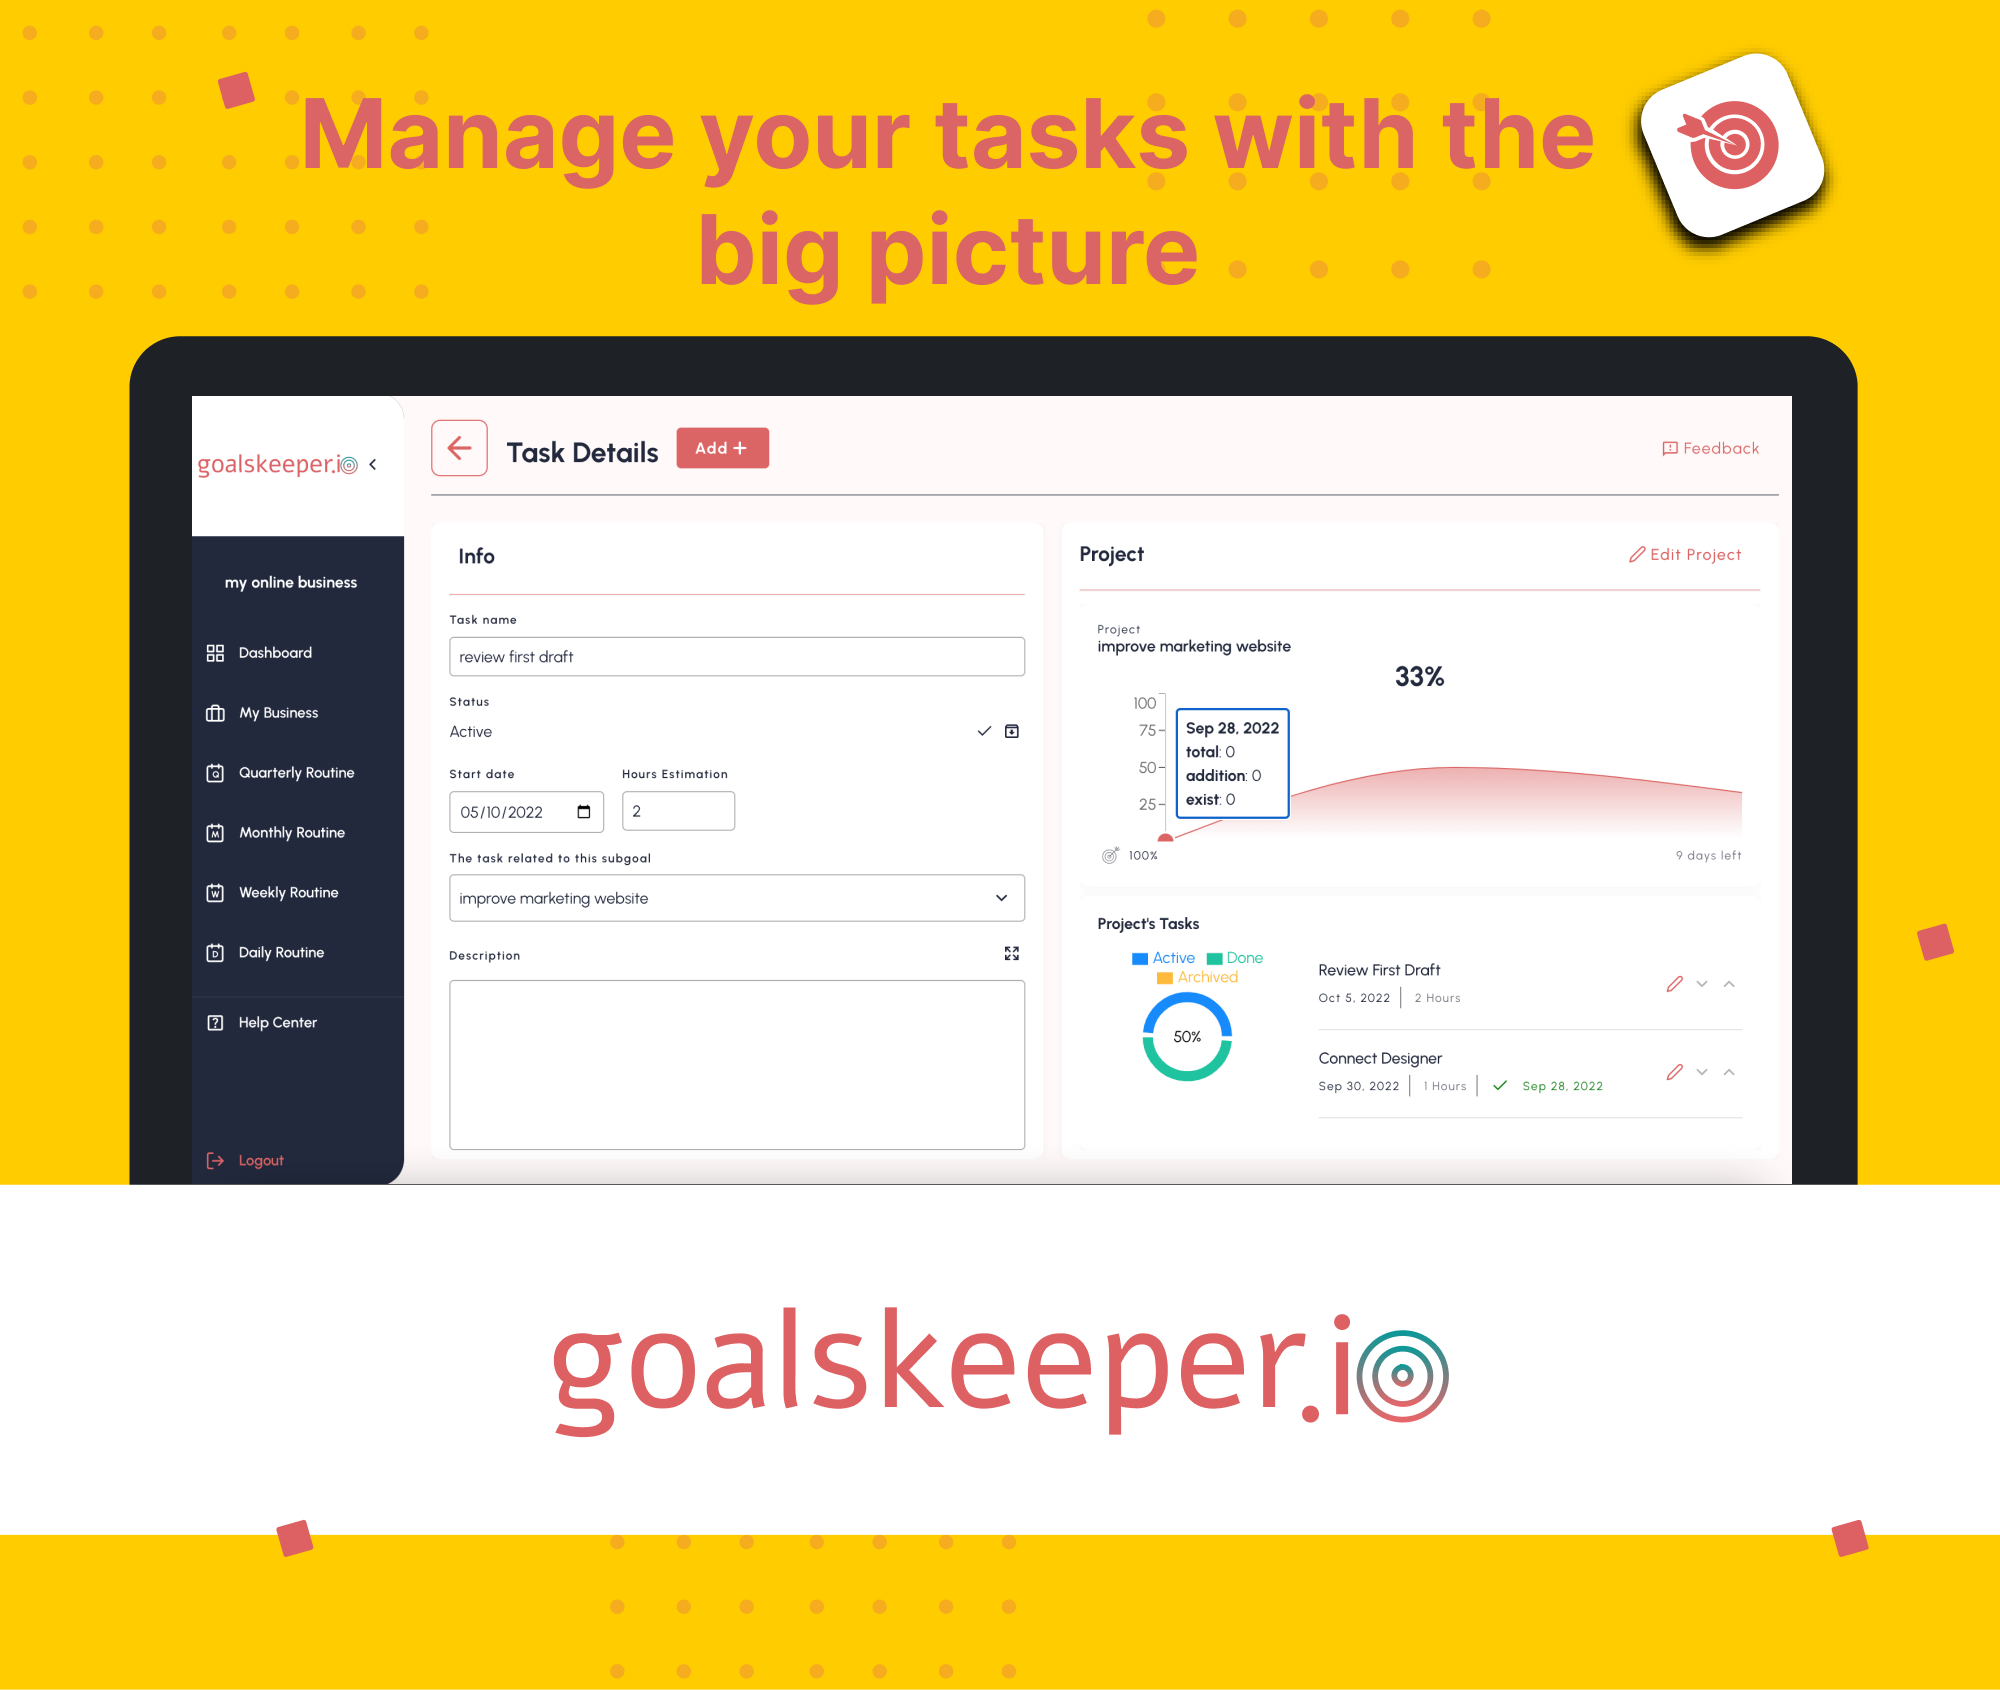 goalskeeper.io Software - focus on your business goals even when you are working on the day-to-day tasks